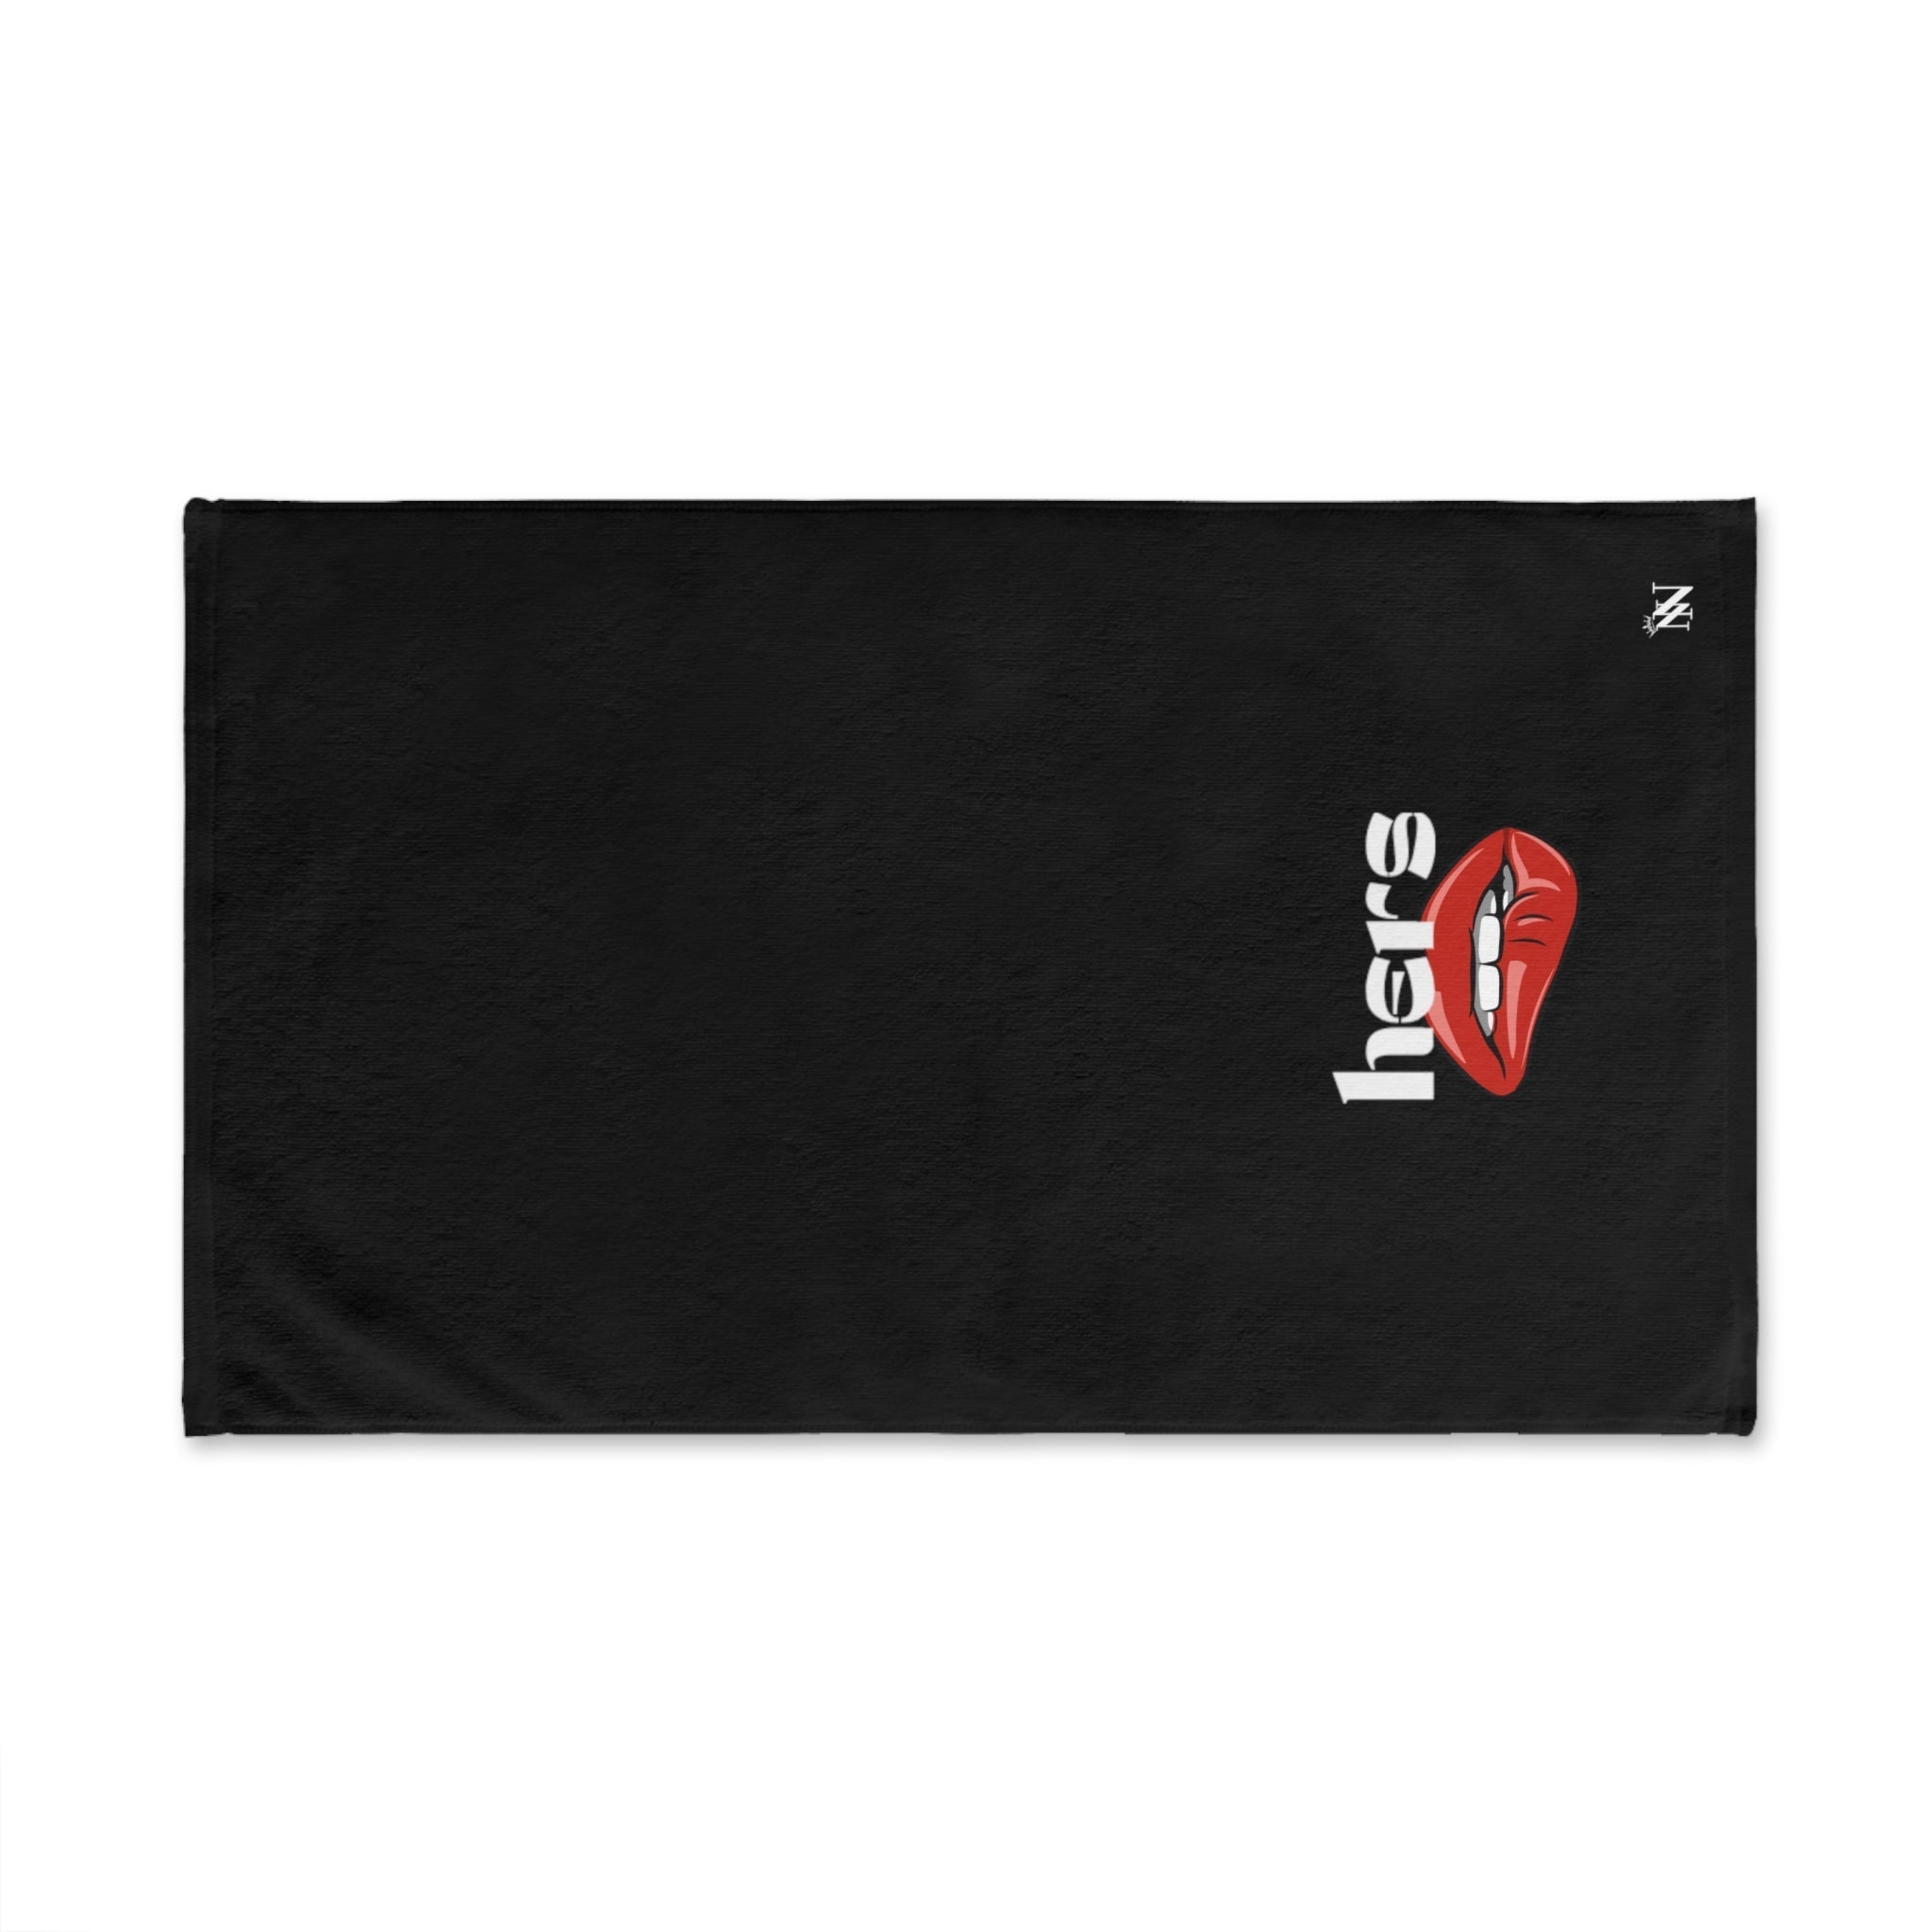 Hers Biting Lips Black | Sexy Gifts for Boyfriend, Funny Towel Romantic Gift for Wedding Couple Fiance First Year 2nd Anniversary Valentines, Party Gag Gifts, Joke Humor Cloth for Husband Men BF NECTAR NAPKINS